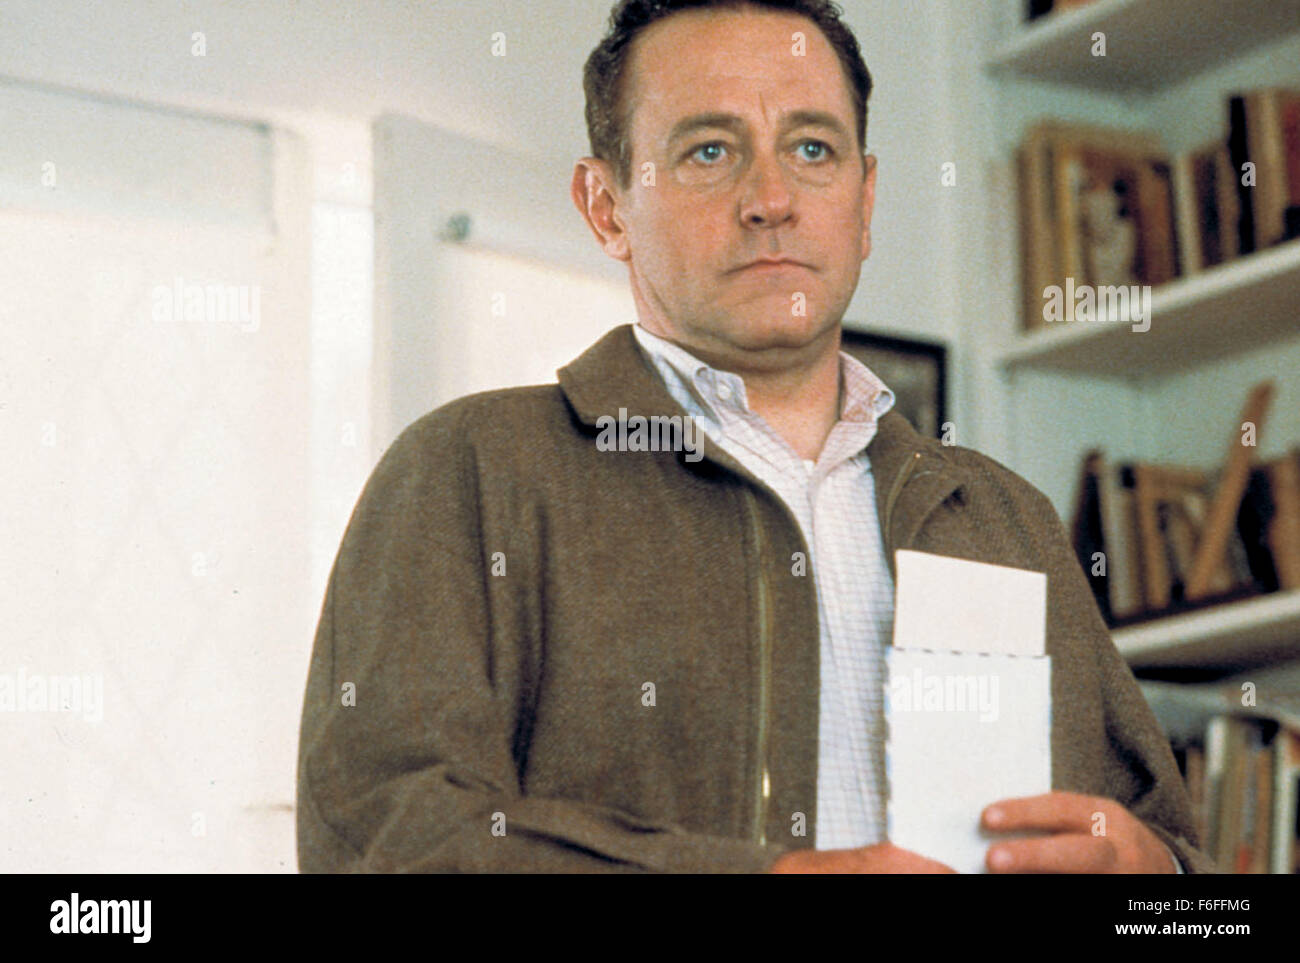 Jan 23, 1989; Hollywood, CA, USA; Image from director Cameron Crowe's drama romance 'Say Anything' starring JOHN MAHONEY as James Court. Stock Photo